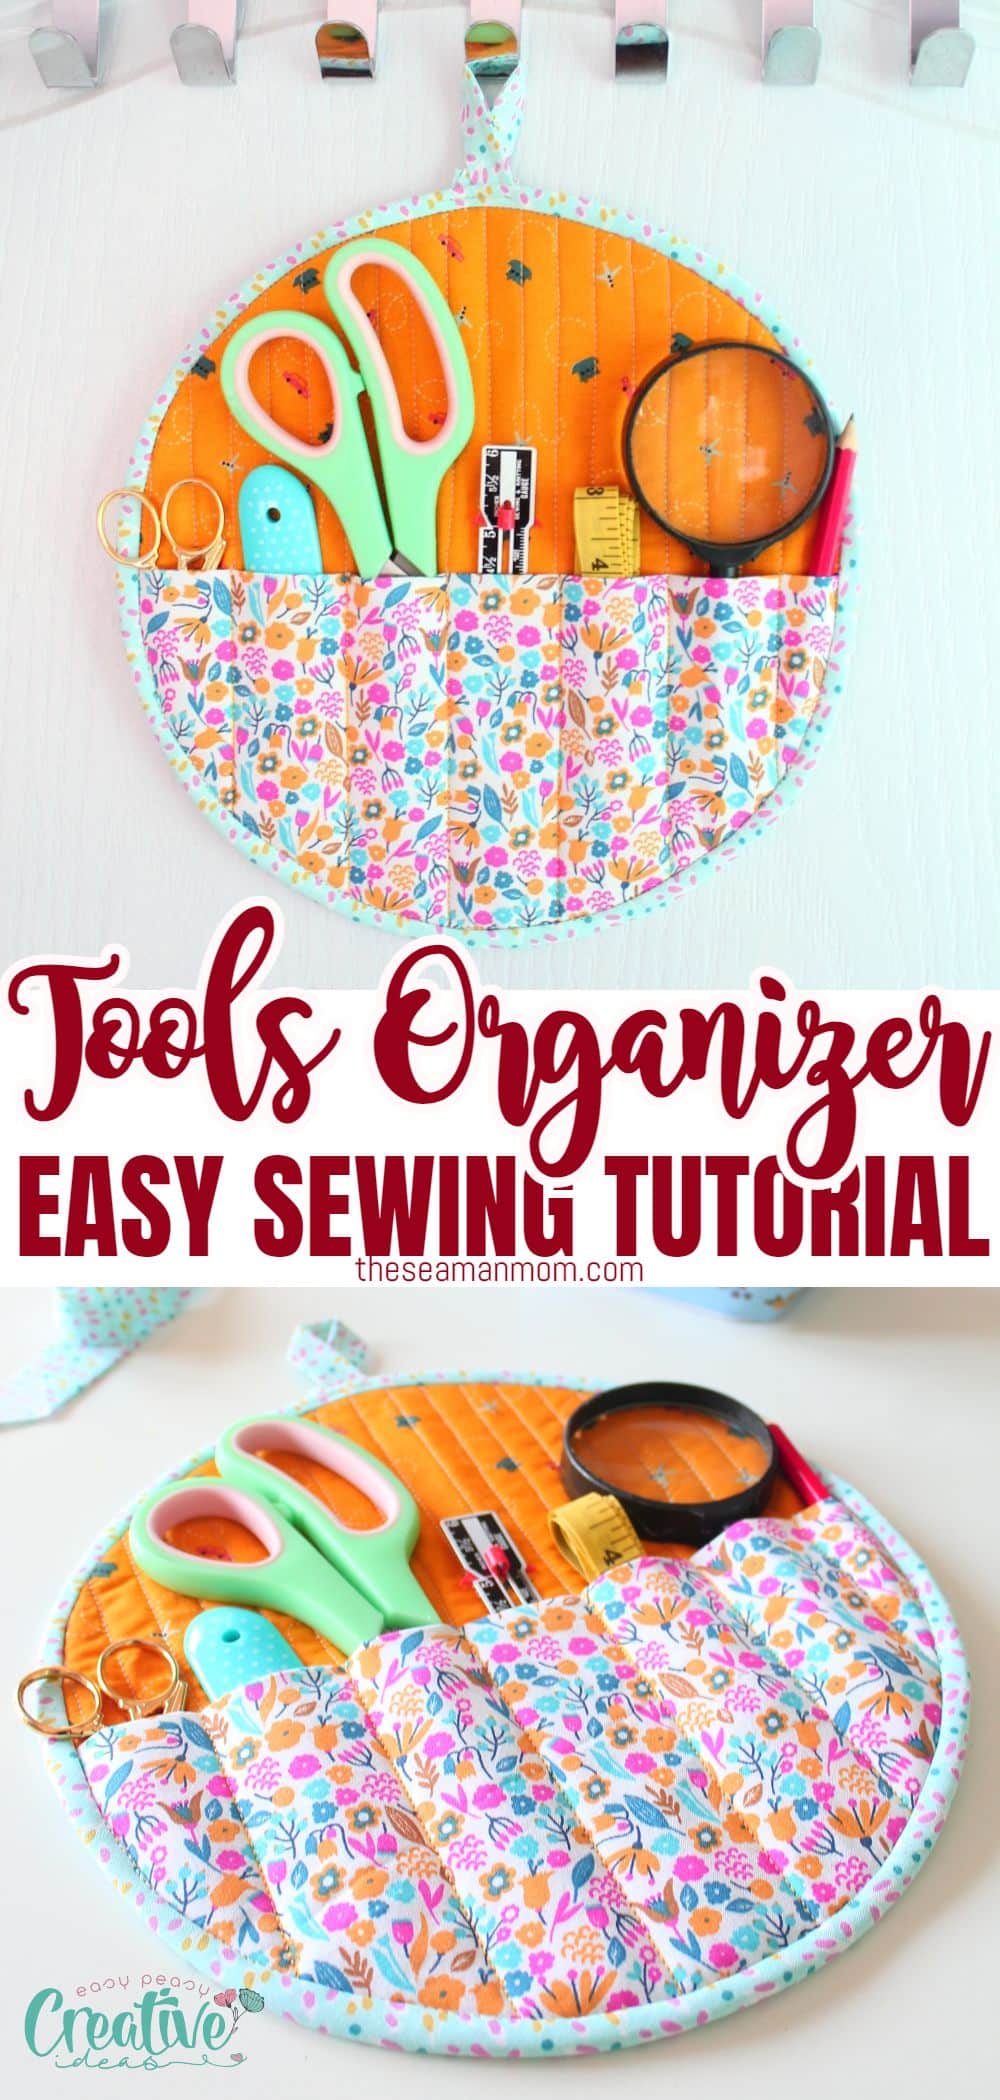 Are you tired of spending precious time rummaging through messy drawers and tangled threads in search of your sewing supplies? Look no further because I have the ultimate solution for you: a beautiful, easy to sew, quilted sewing supplies organizer. via @petroneagu